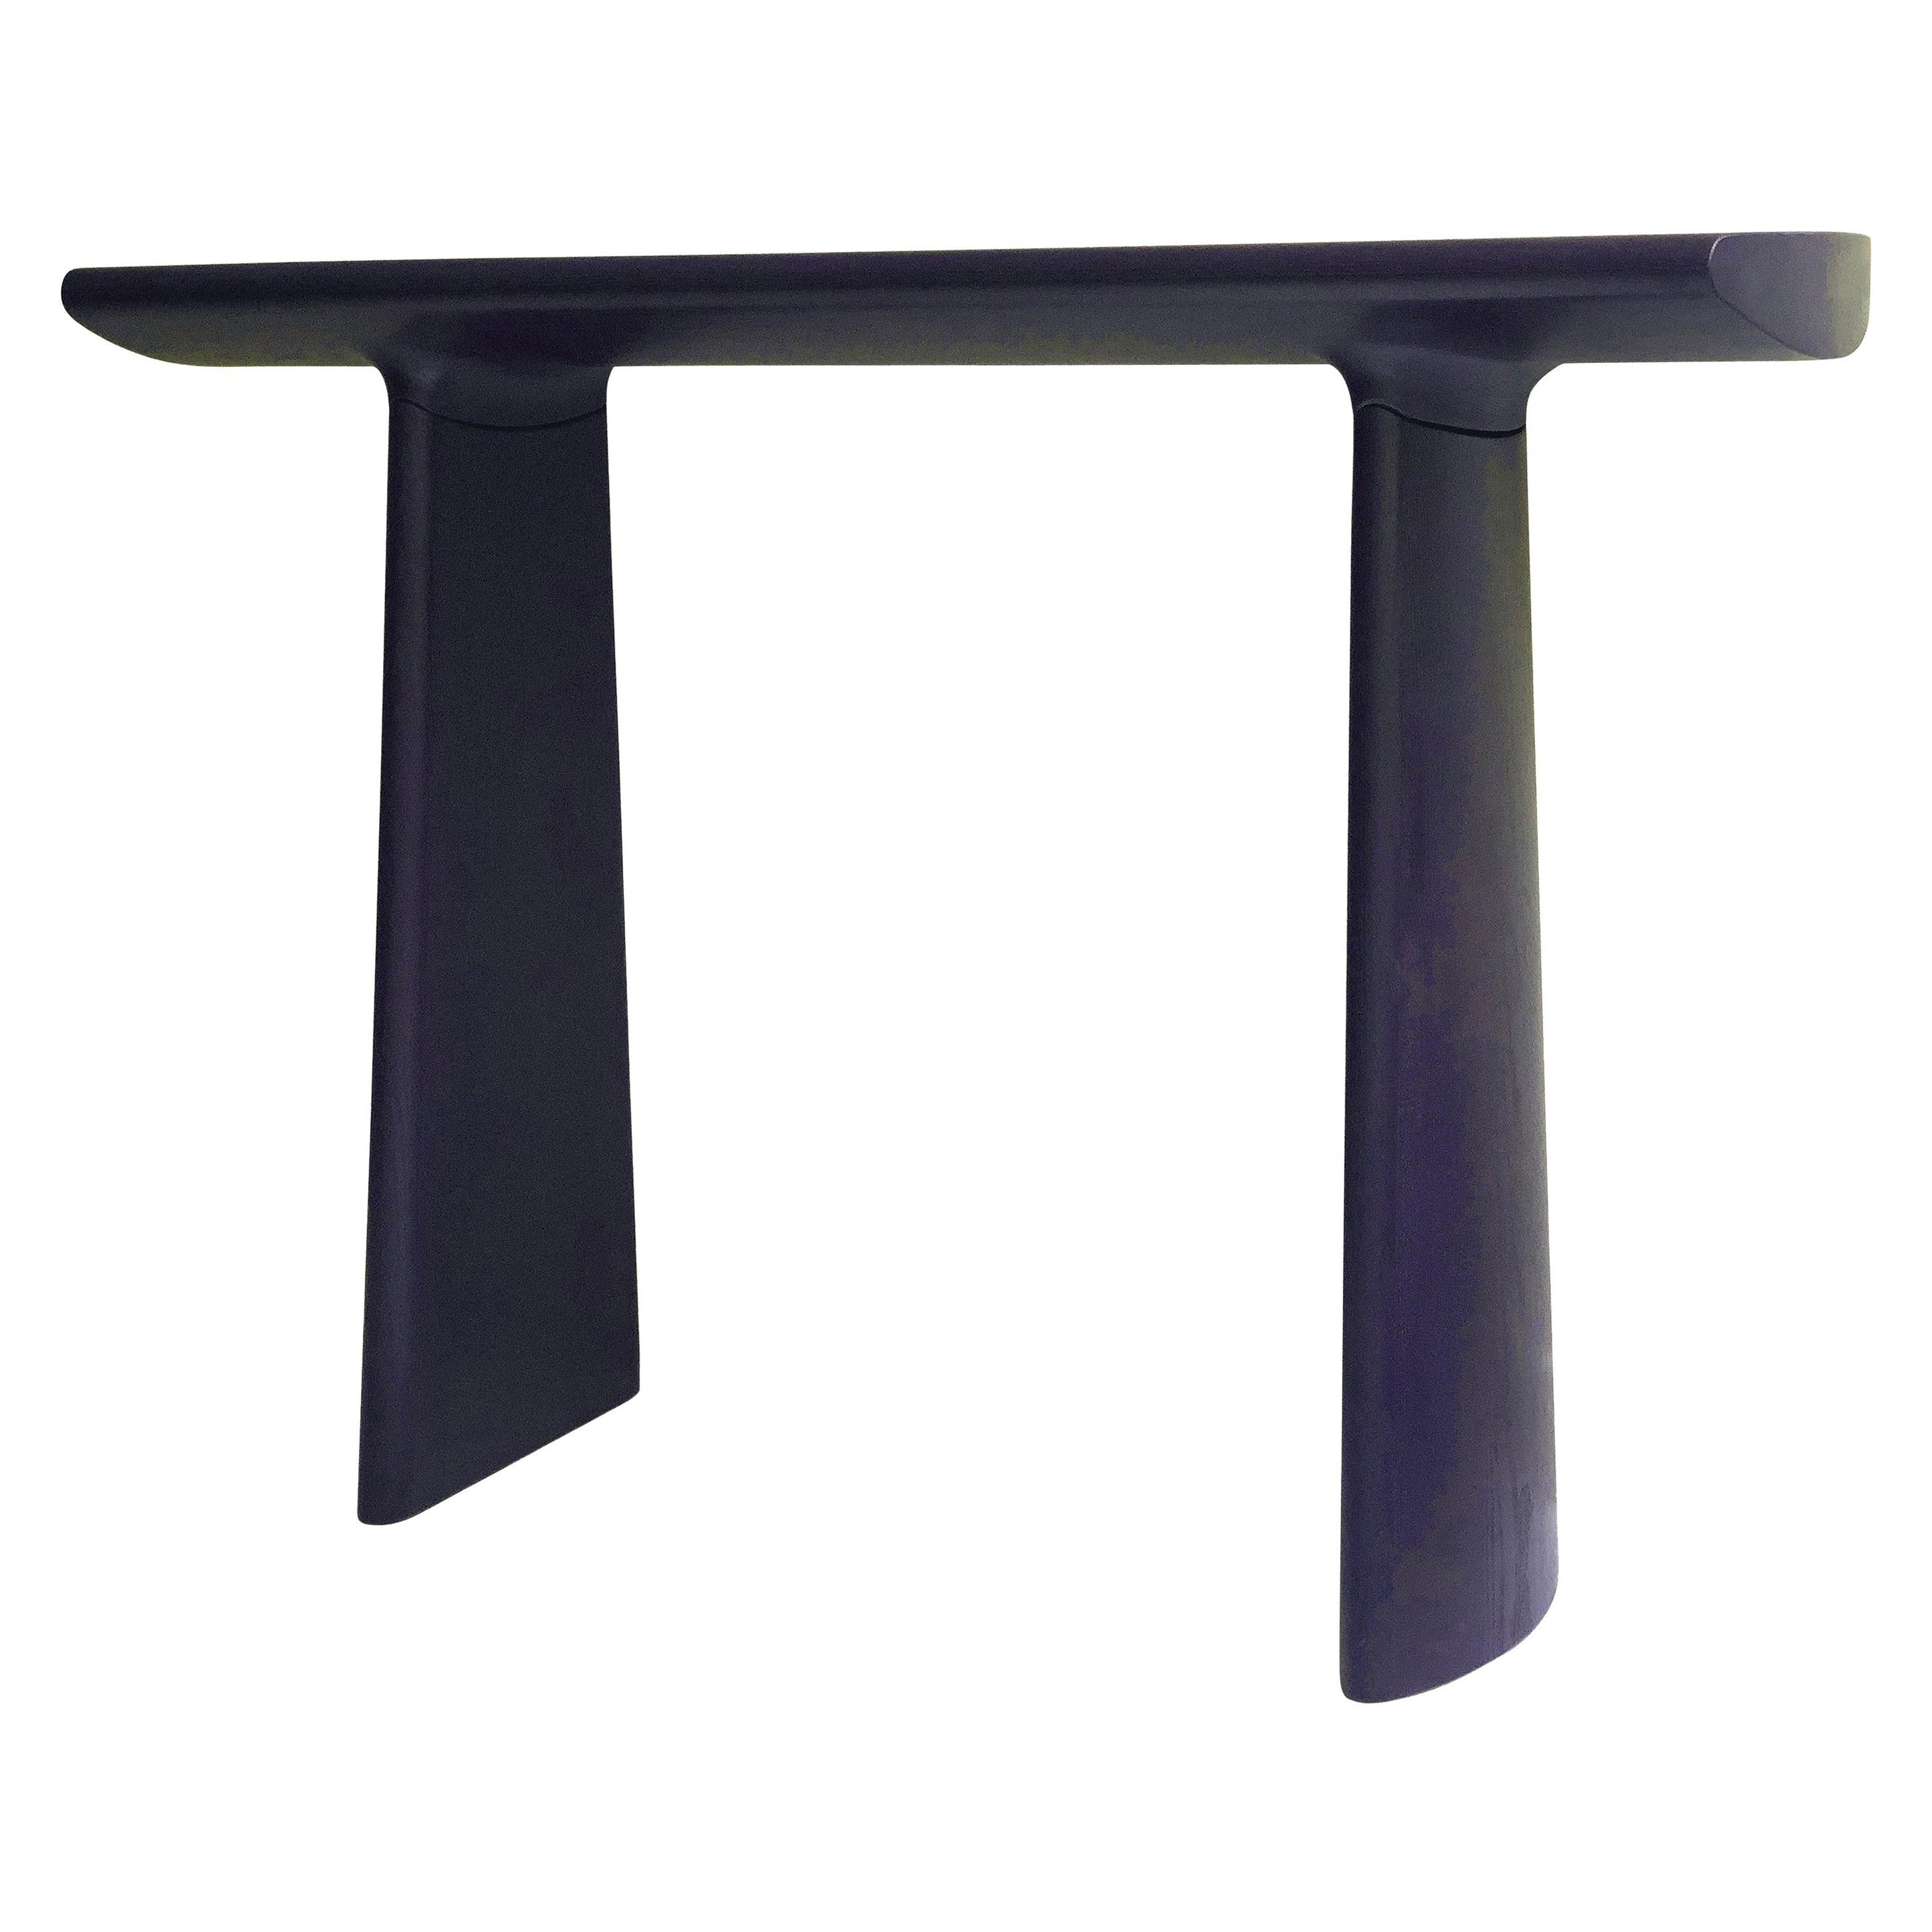 Night Blue Stained Ash Daiku Console 120 by Victoria Magniant For Sale